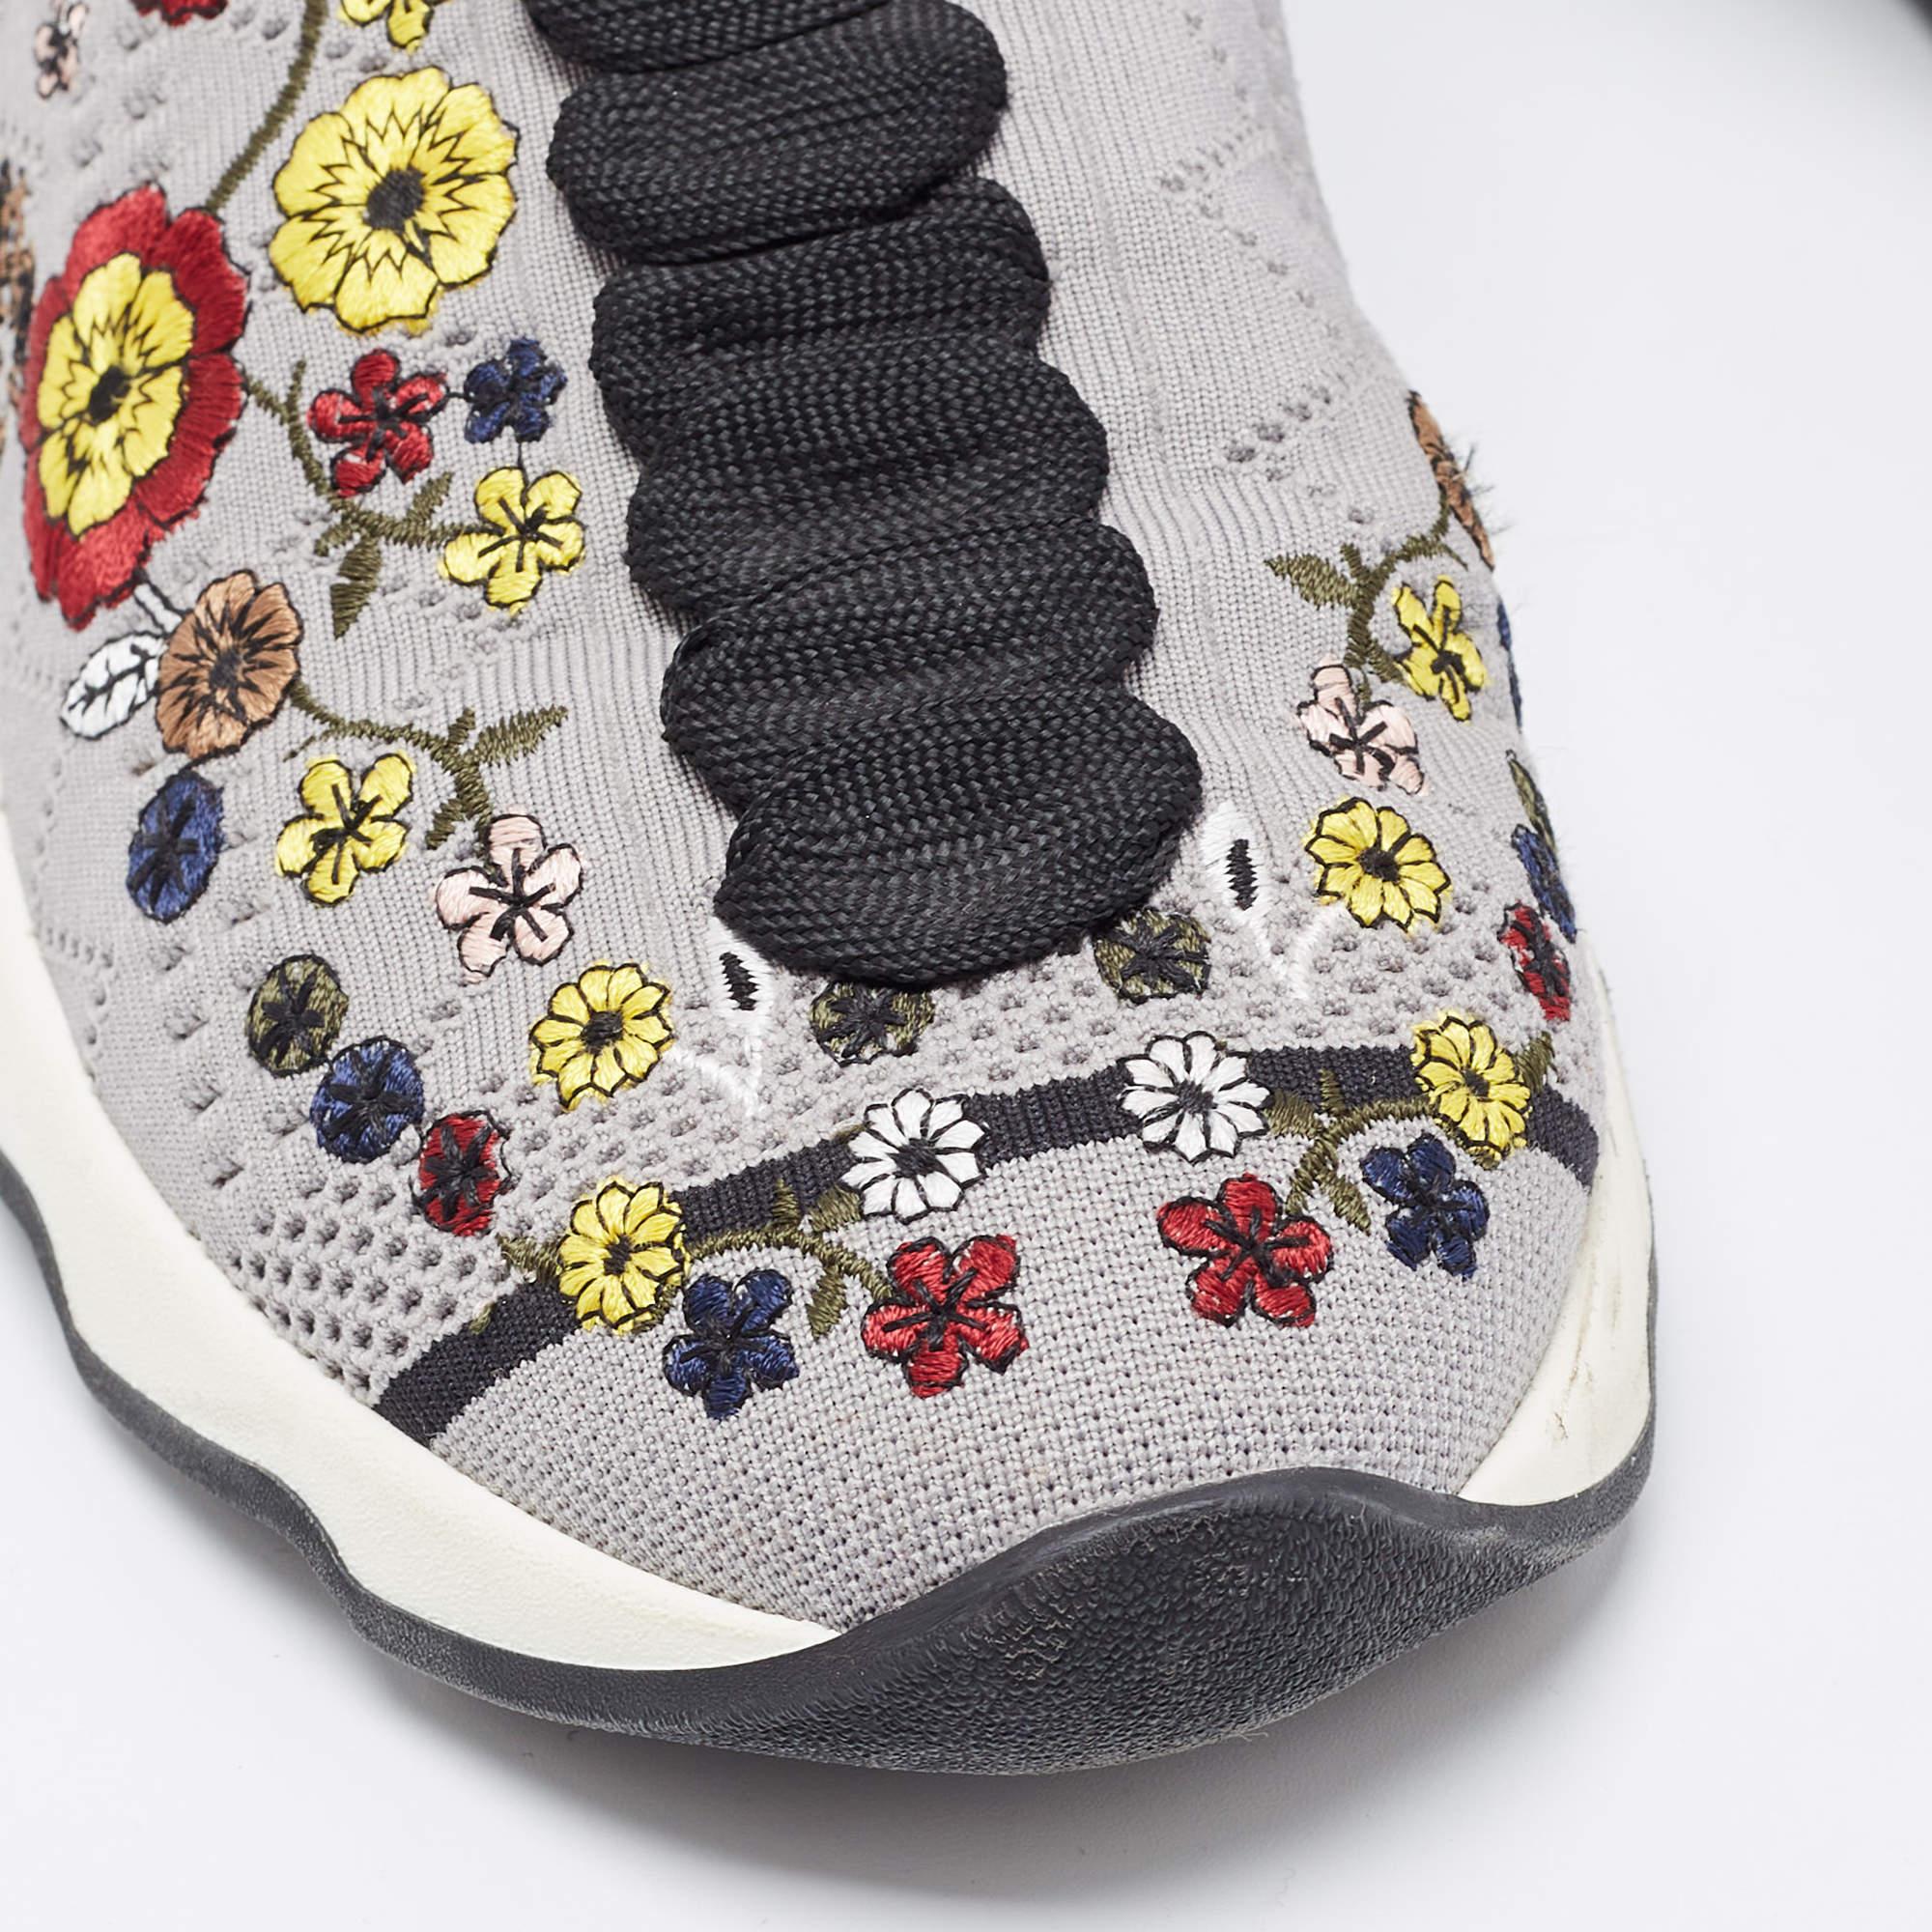 Fendi Grey Floral Embroidered Knit Fabric Slip On Sneakers Size 38 For Sale 1